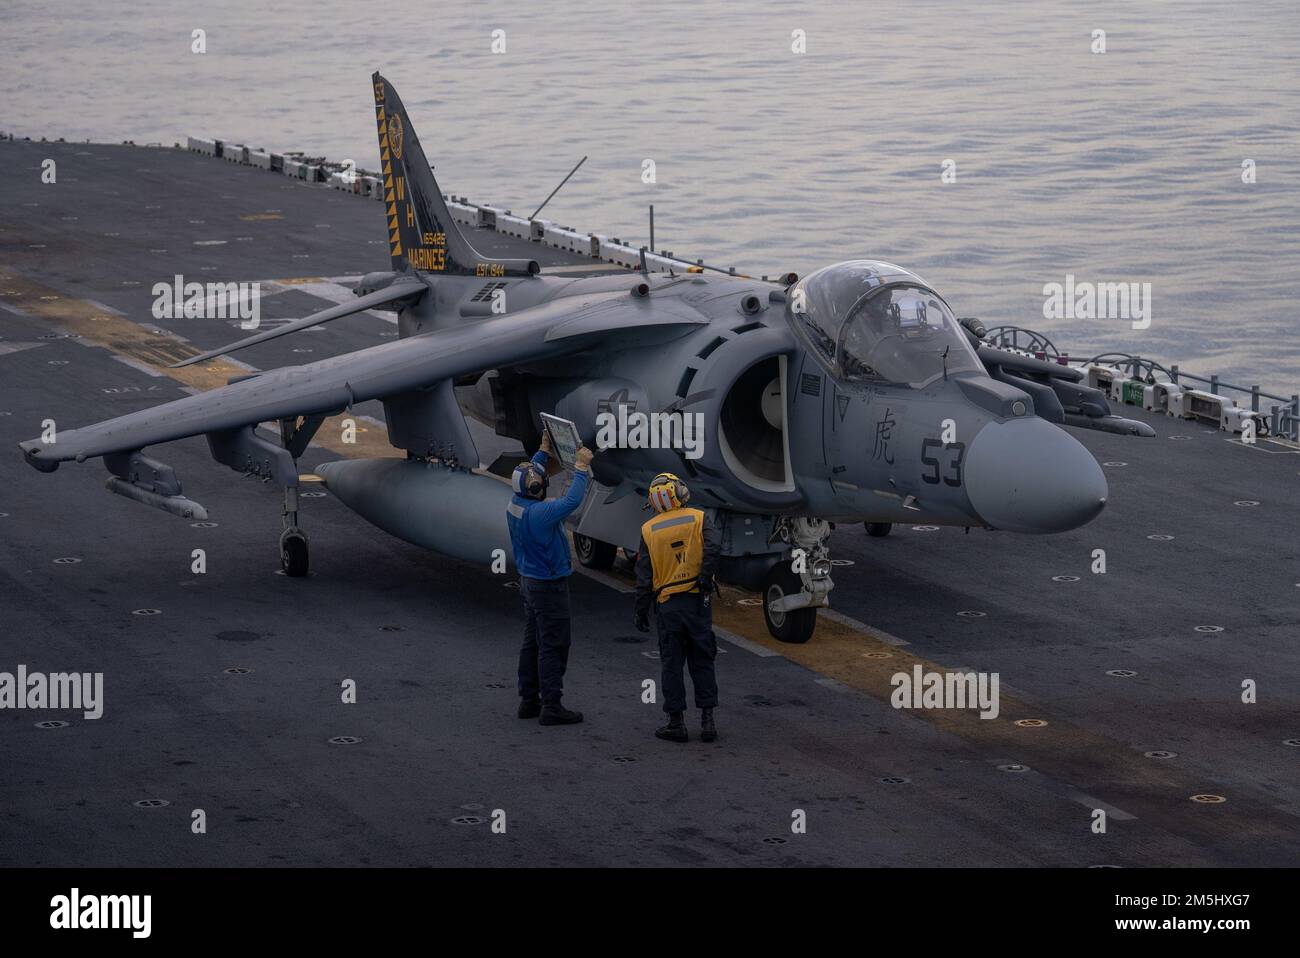 ATLANTIC OCEAN – An AV-8B Harrier, attached to Marine Attack Squadron (VMA) 542, prepares to take off from the flight deck aboard the Wasp-class amphibious assault ship USS Kearsarge (LHD 3) March 18, 2022. The Kearsarge Amphibious Ready Group (ARG) and 22nd Marine Expeditionary Unit (MEU) are operating in the Atlantic Ocean in support of naval operations to maintain maritime stability and security in order to ensure access, deter aggression and defend U.S., allied and partner interests. Stock Photo